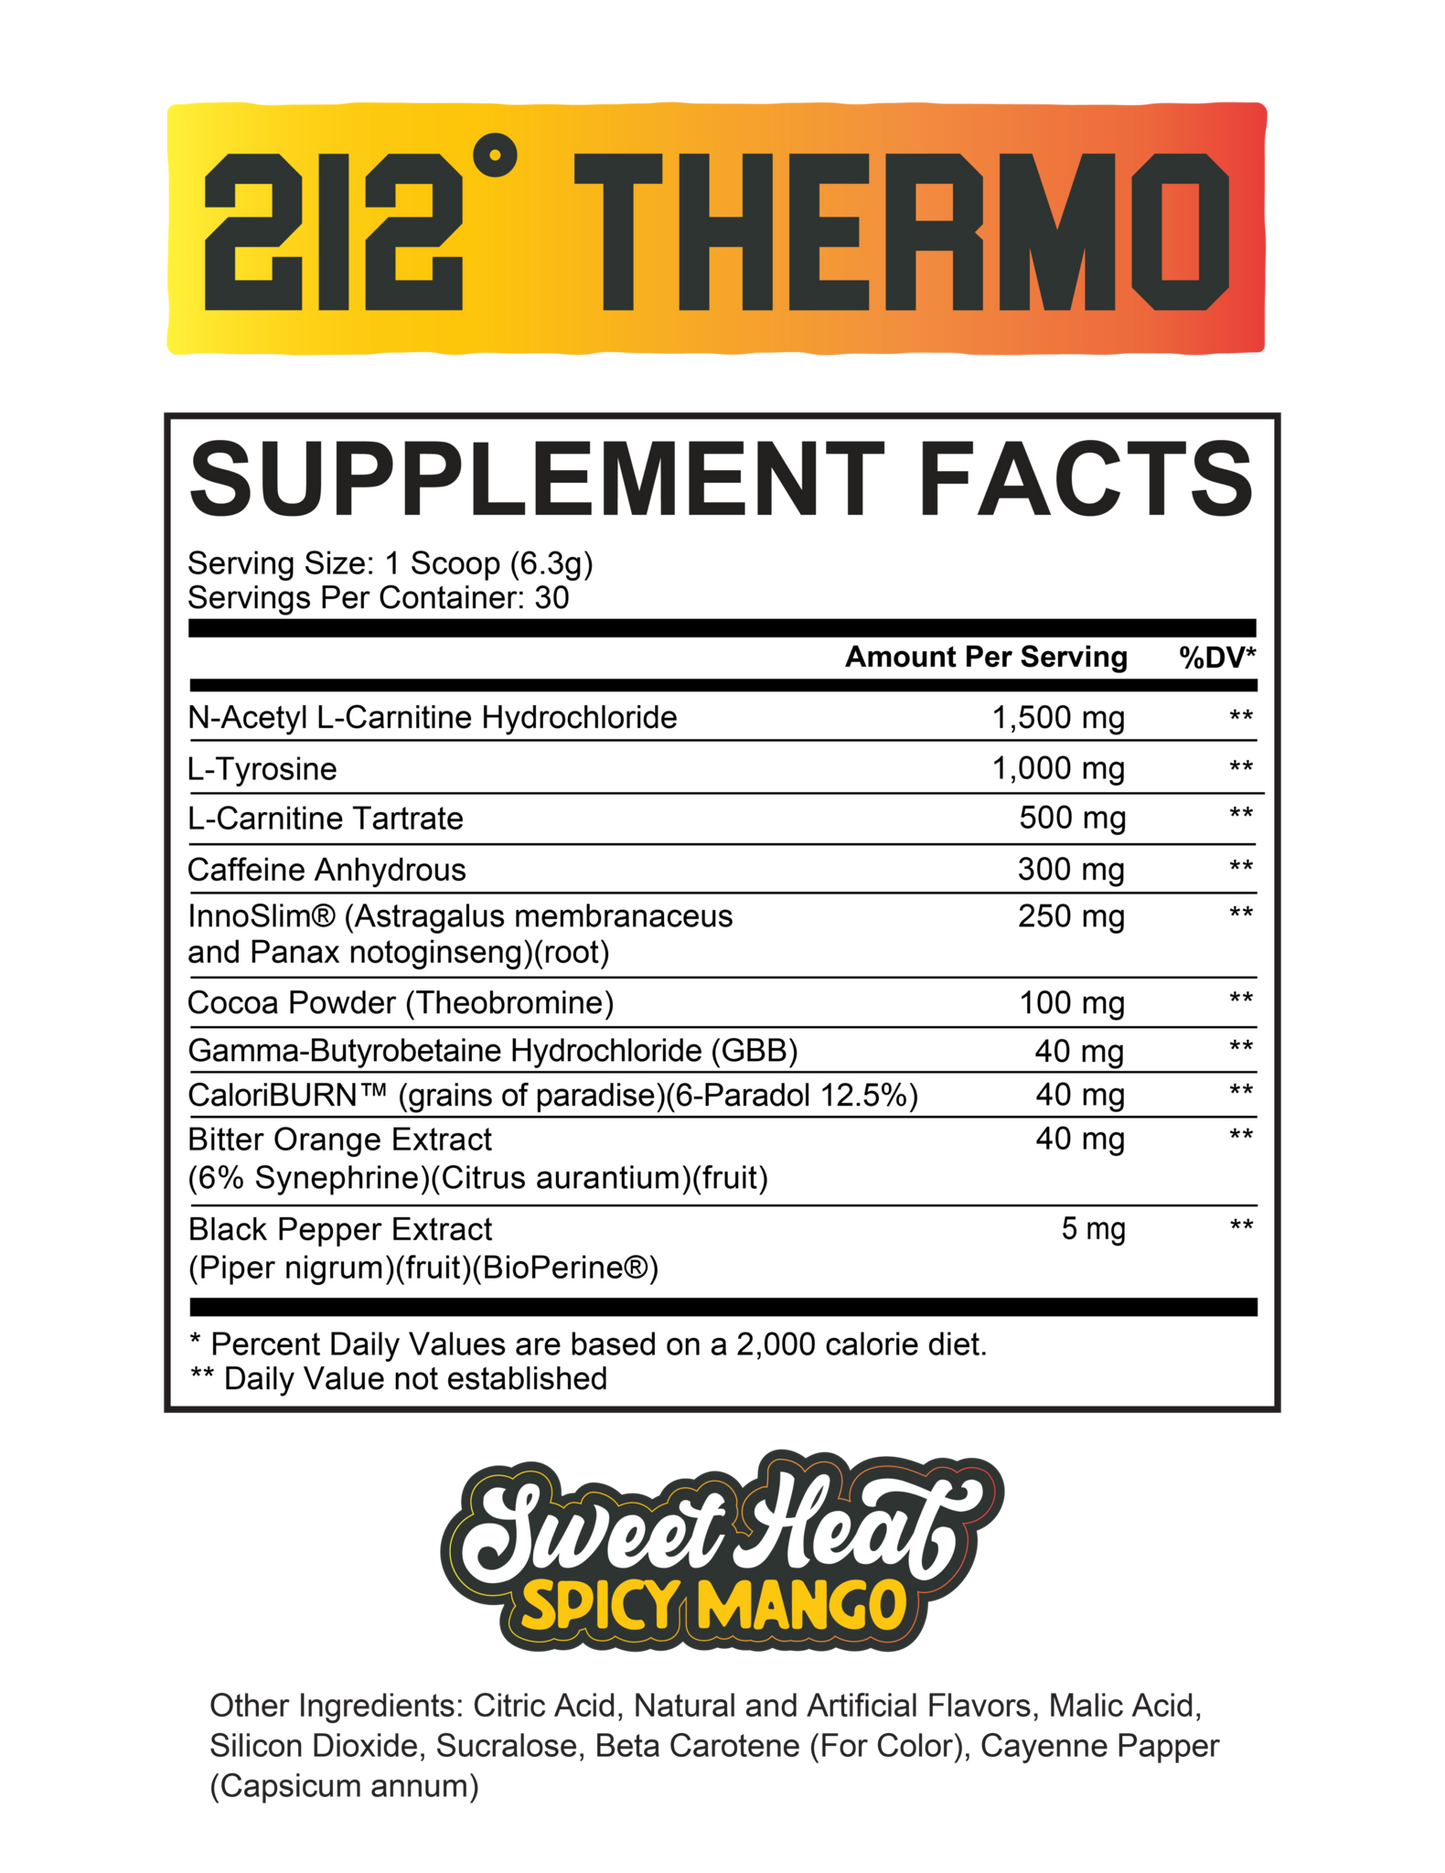 supplement facts of 212 THERMO Fat Burner